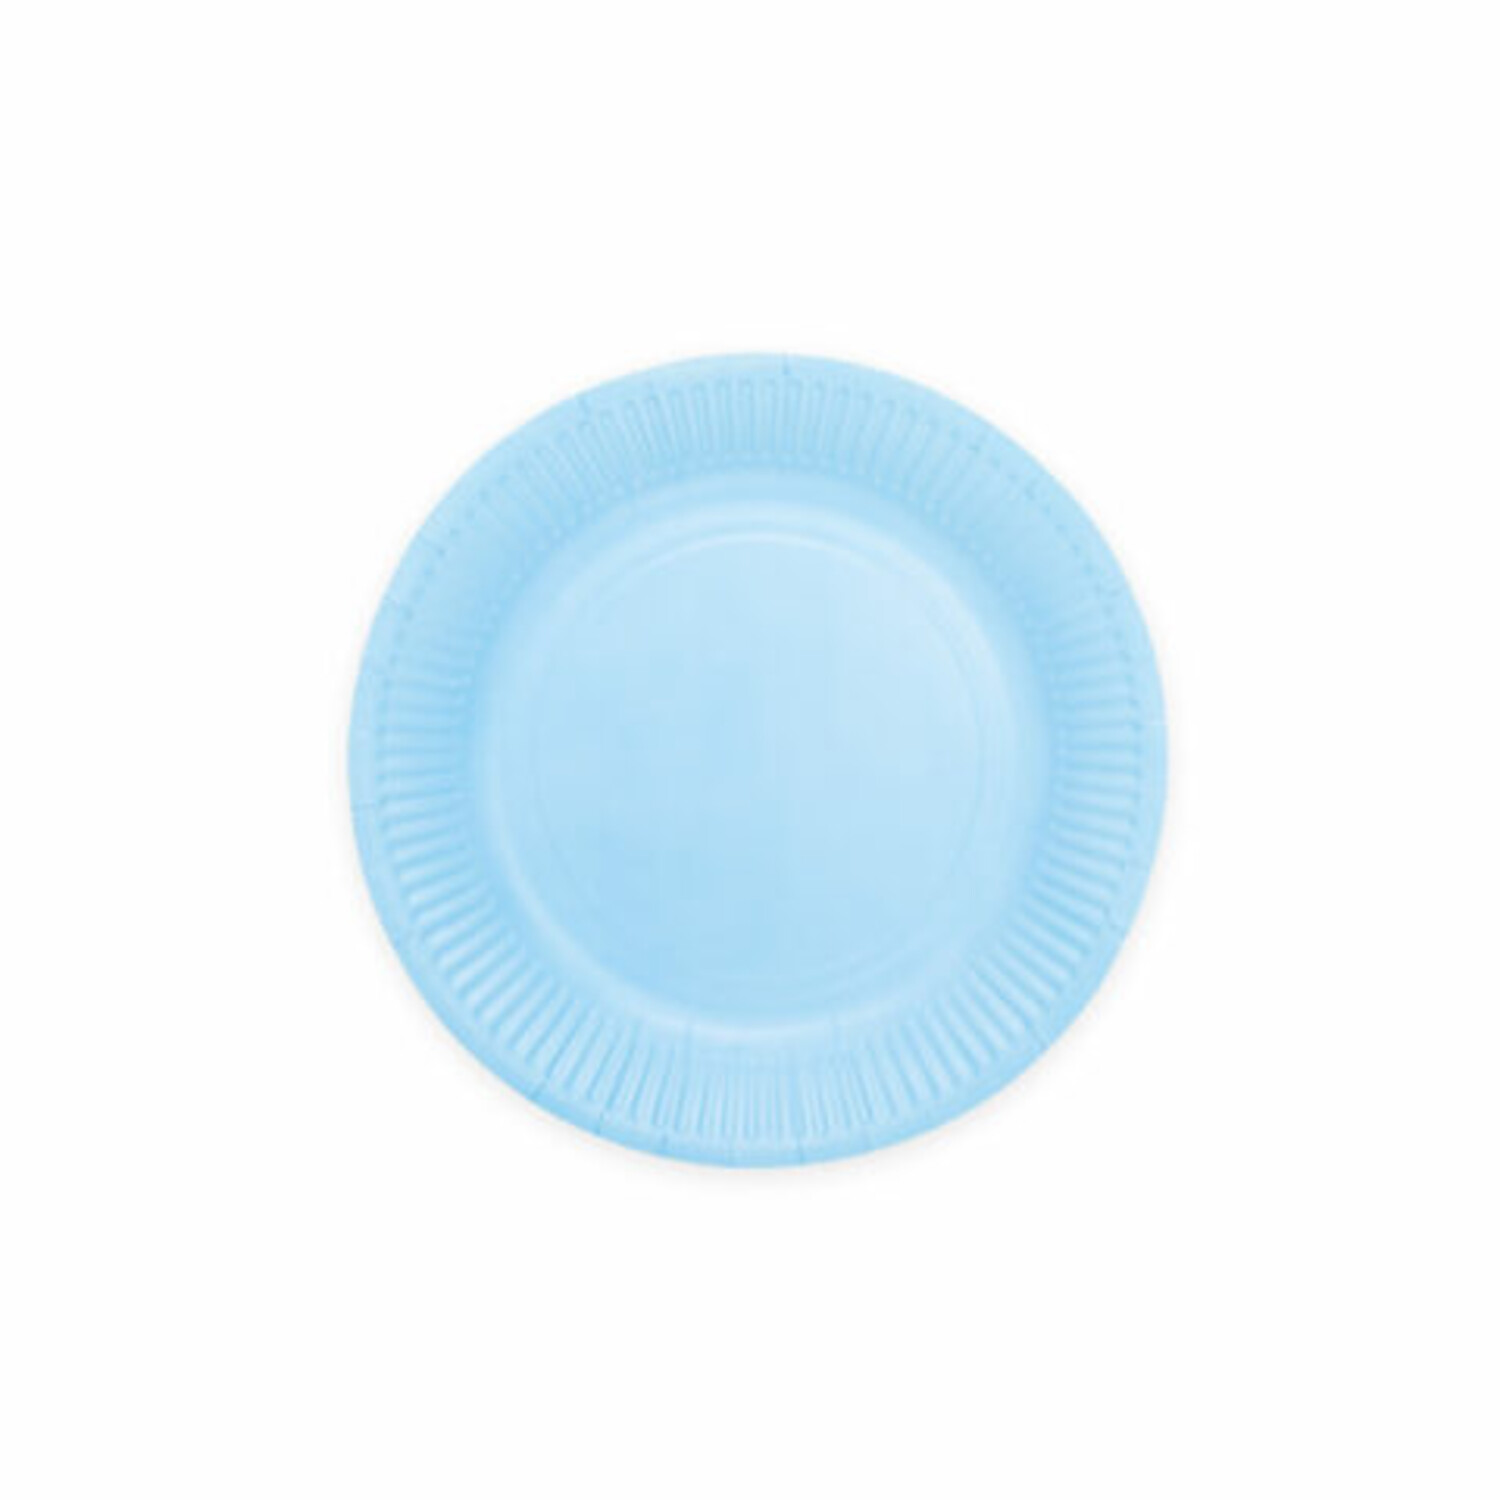 stock Toys | and ✓ Available Tuf-Tuf Treats Buy blue plates? Supplies, from Party -